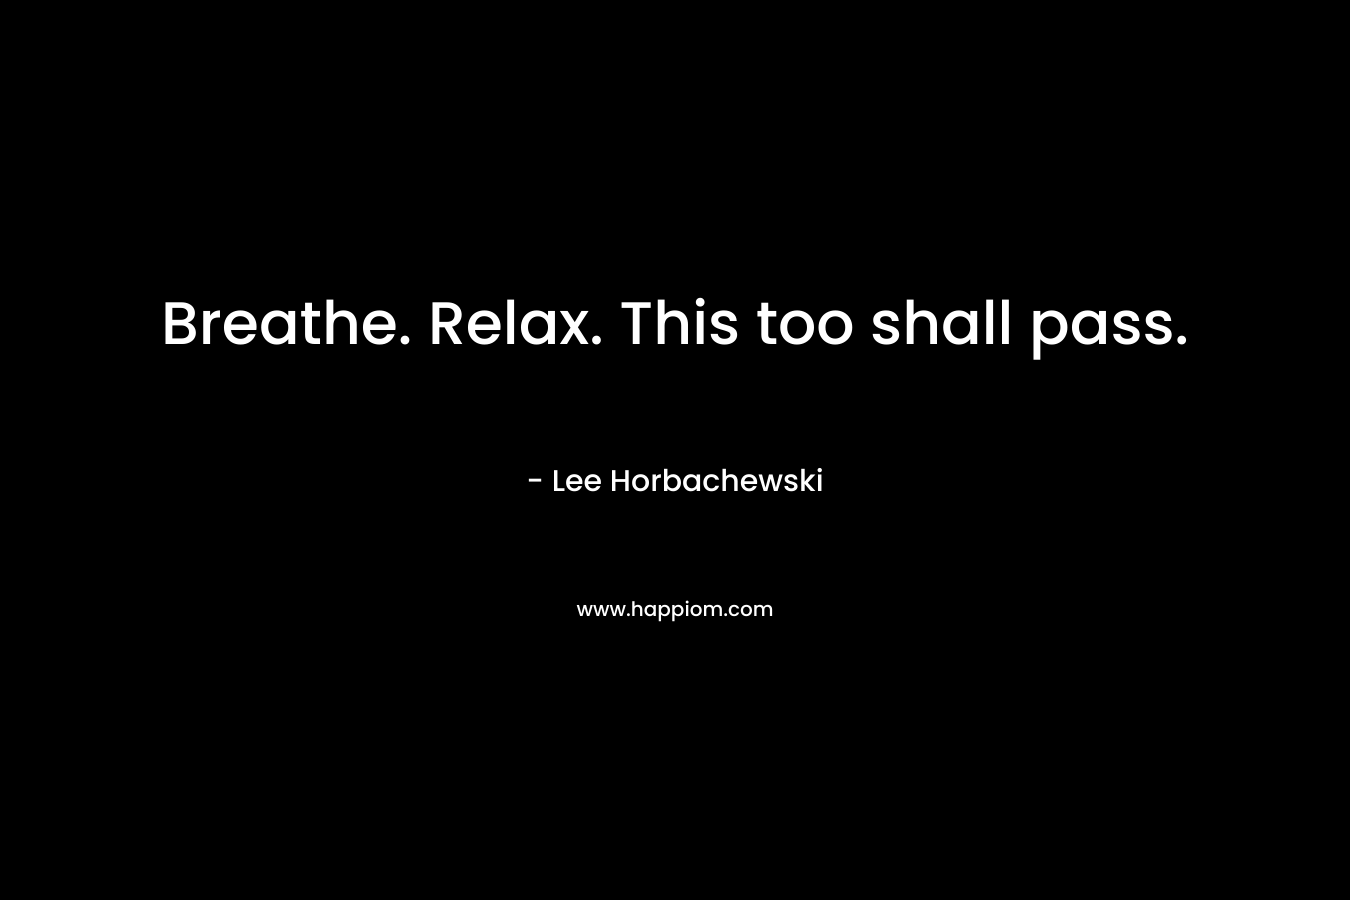 Breathe. Relax. This too shall pass.